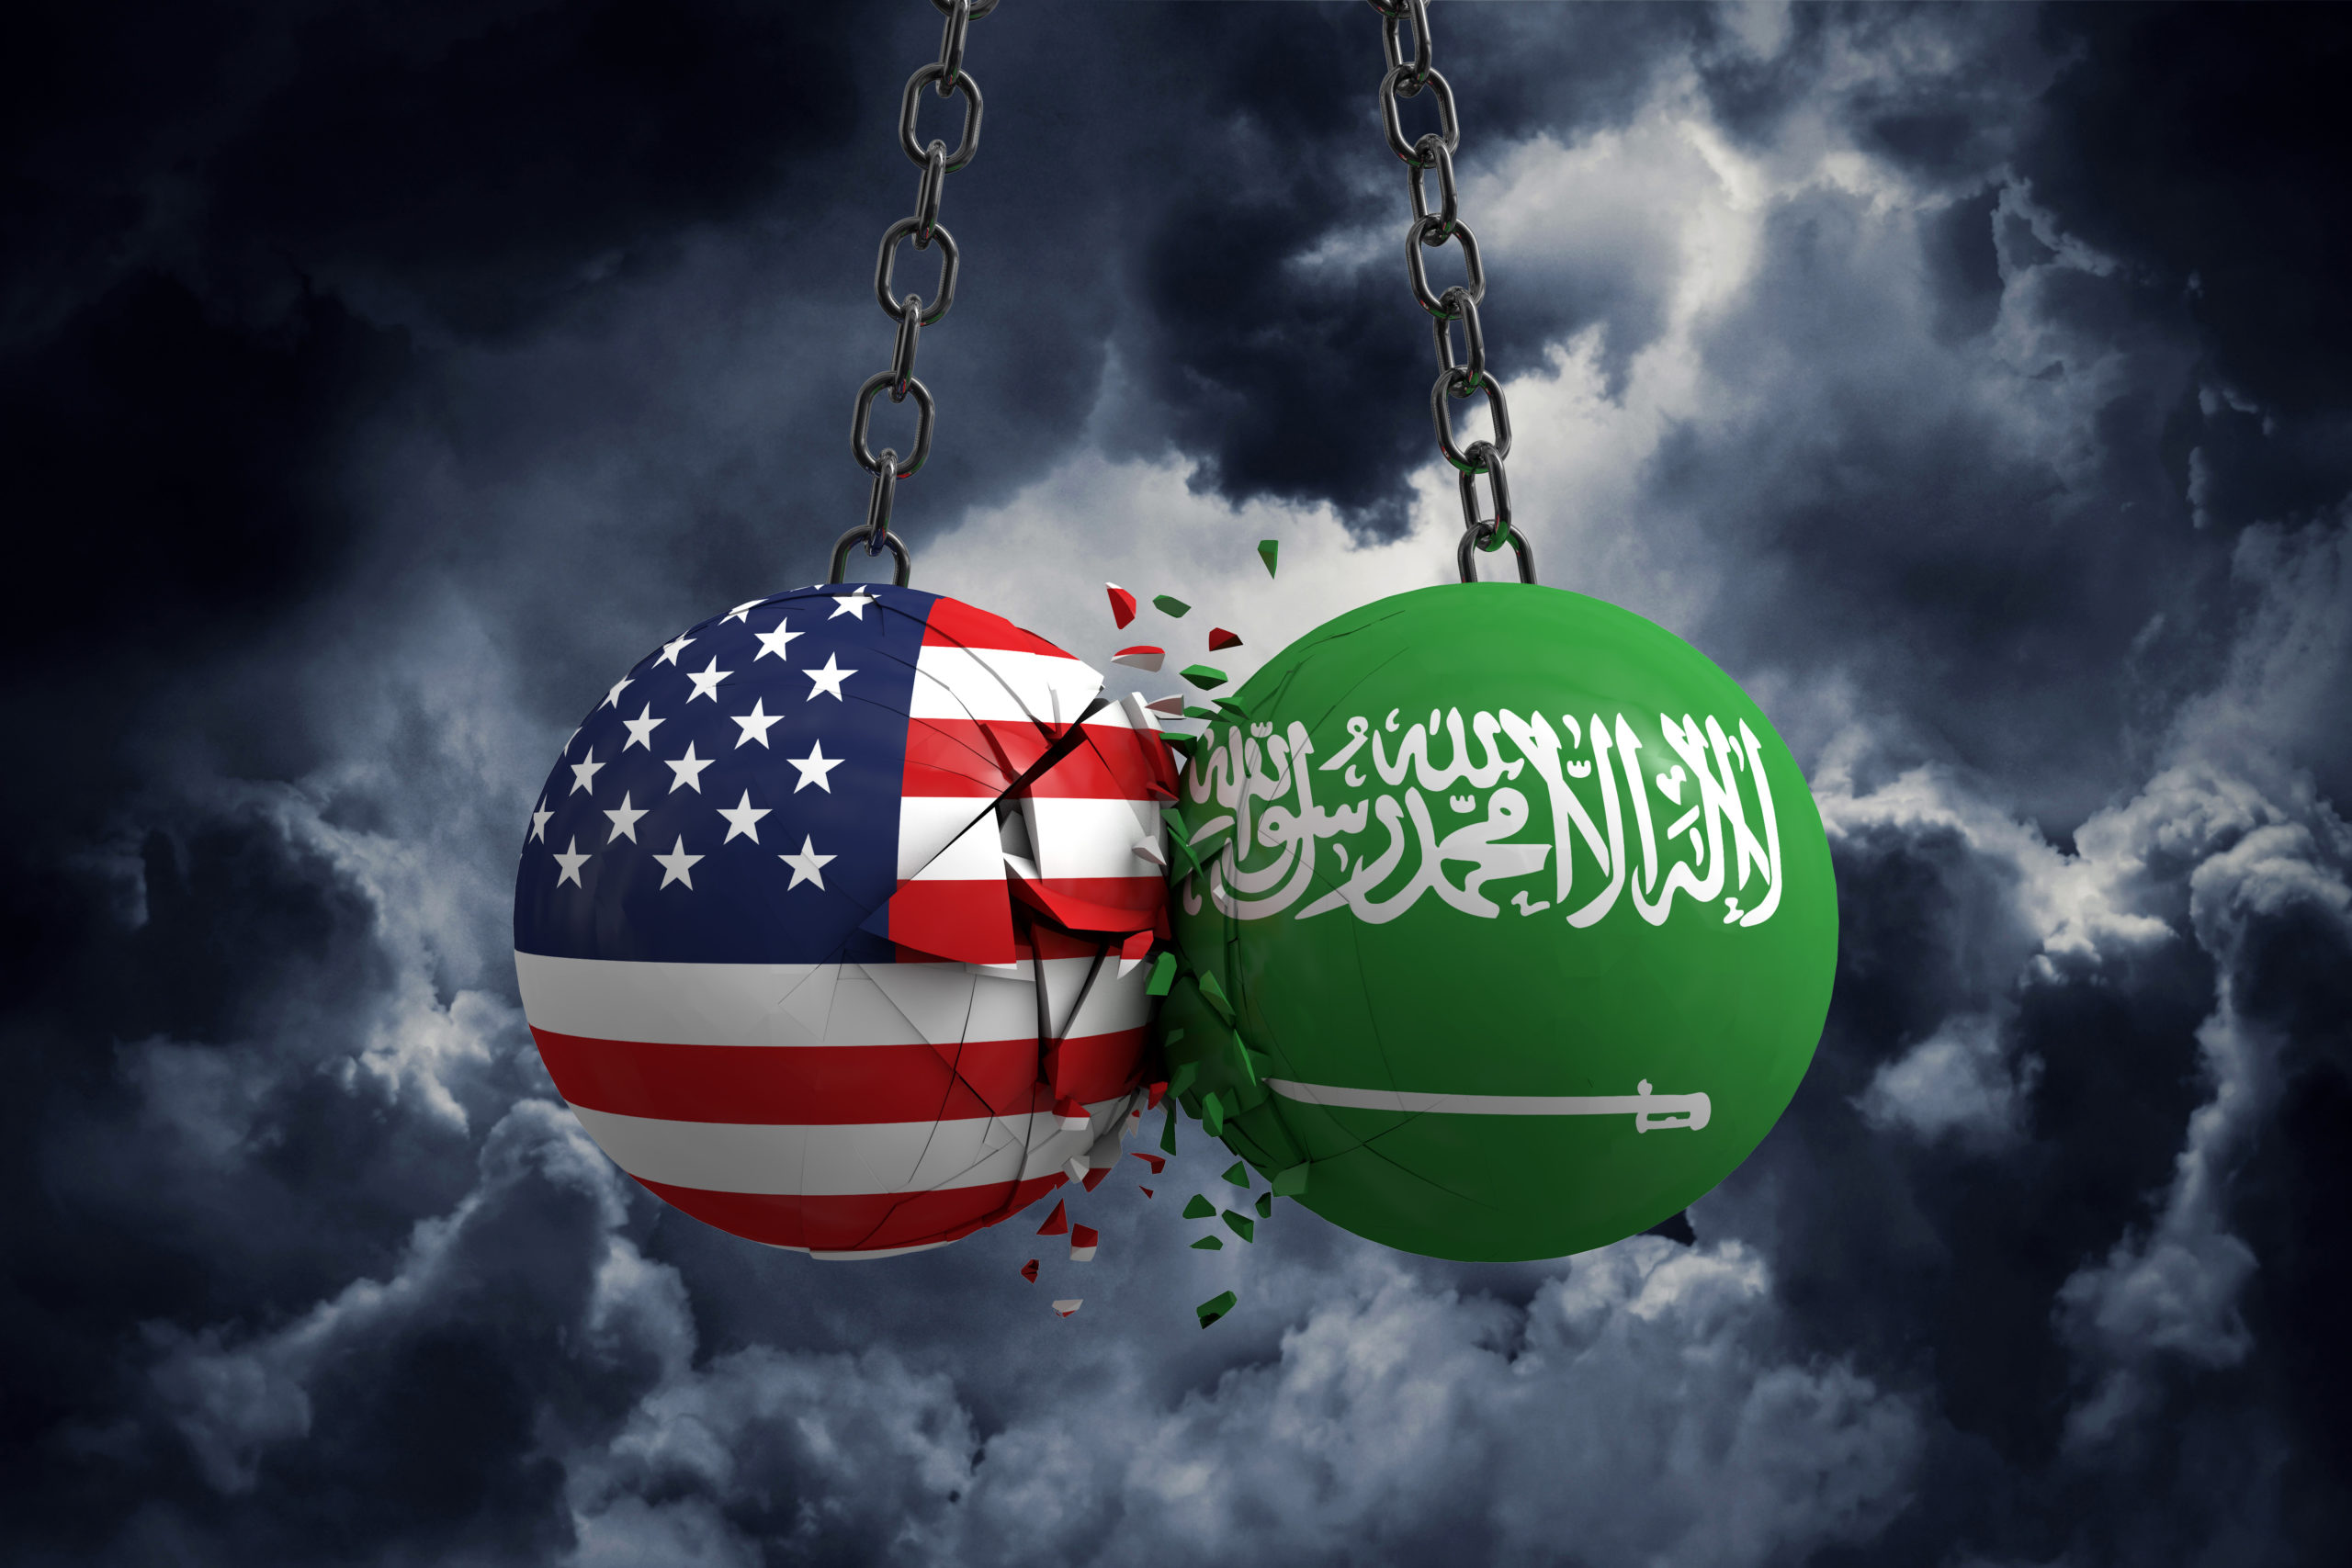 Two wrecking balls colliding - one with American flag, one with Saudi flag